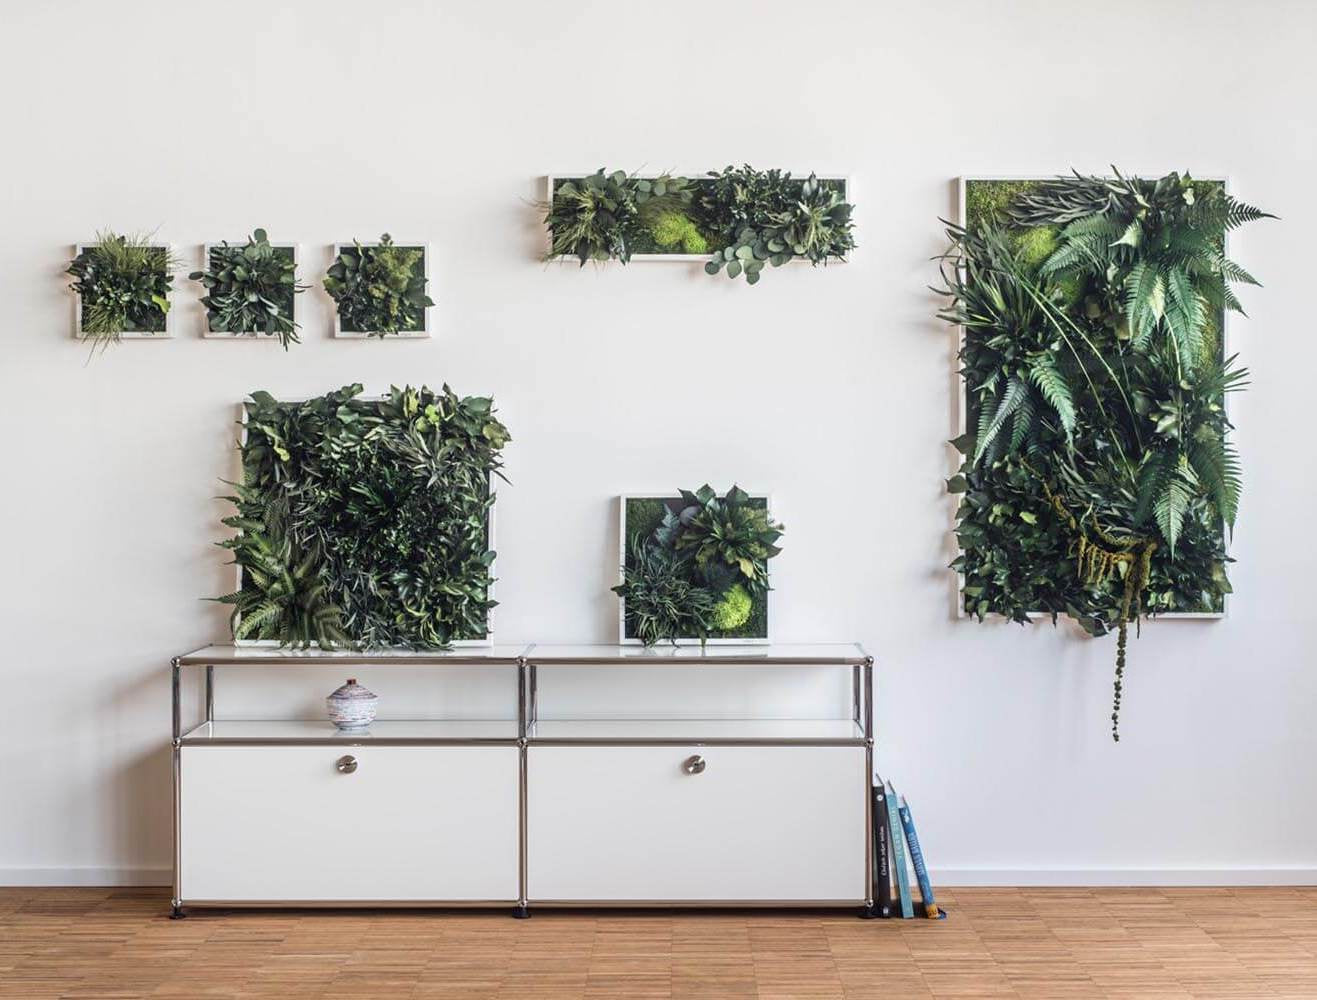 Discover All About Plant and Moss Wall Art - Decor for Sight, Decor for Smell, Decor for Sound, Decor for Wellbeing, Home Decor Ideas, Home Decor Styles, Mental and Emotional Health, Plants, Wall Decor - Forest Homes